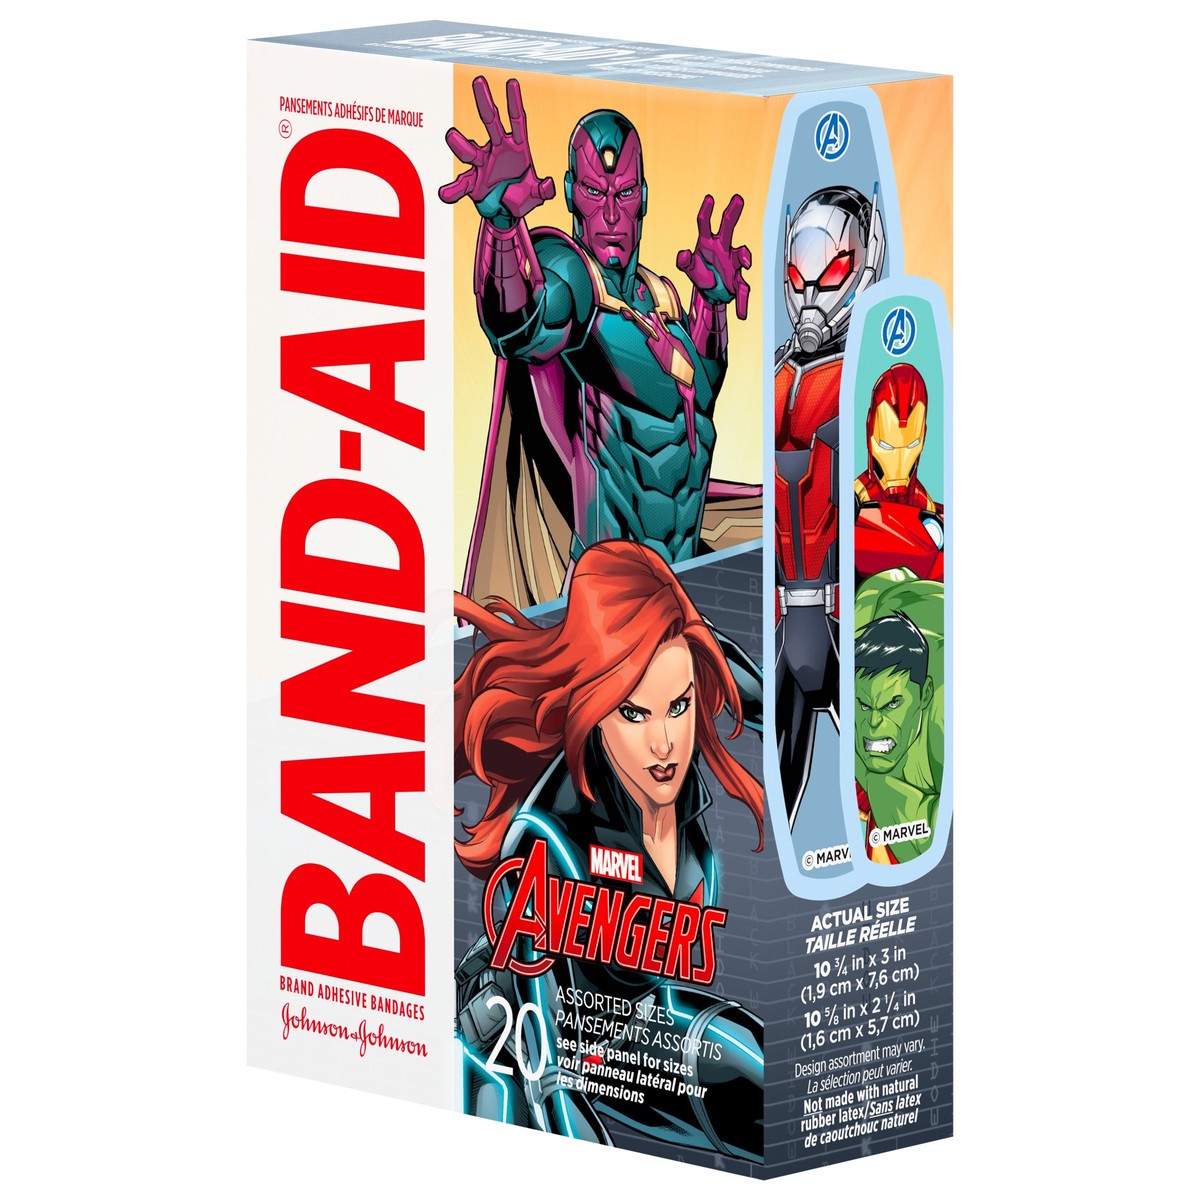 slide 6 of 8, BAND-AID Adhesive Bandages for Minor Cuts & Scrapes, Wound Care Bandages Featuring Marvel Avengers Characters, Fun Decorative Bandages for Kids & Toddlers, Assorted Sizes, 20 ct, 20 ct